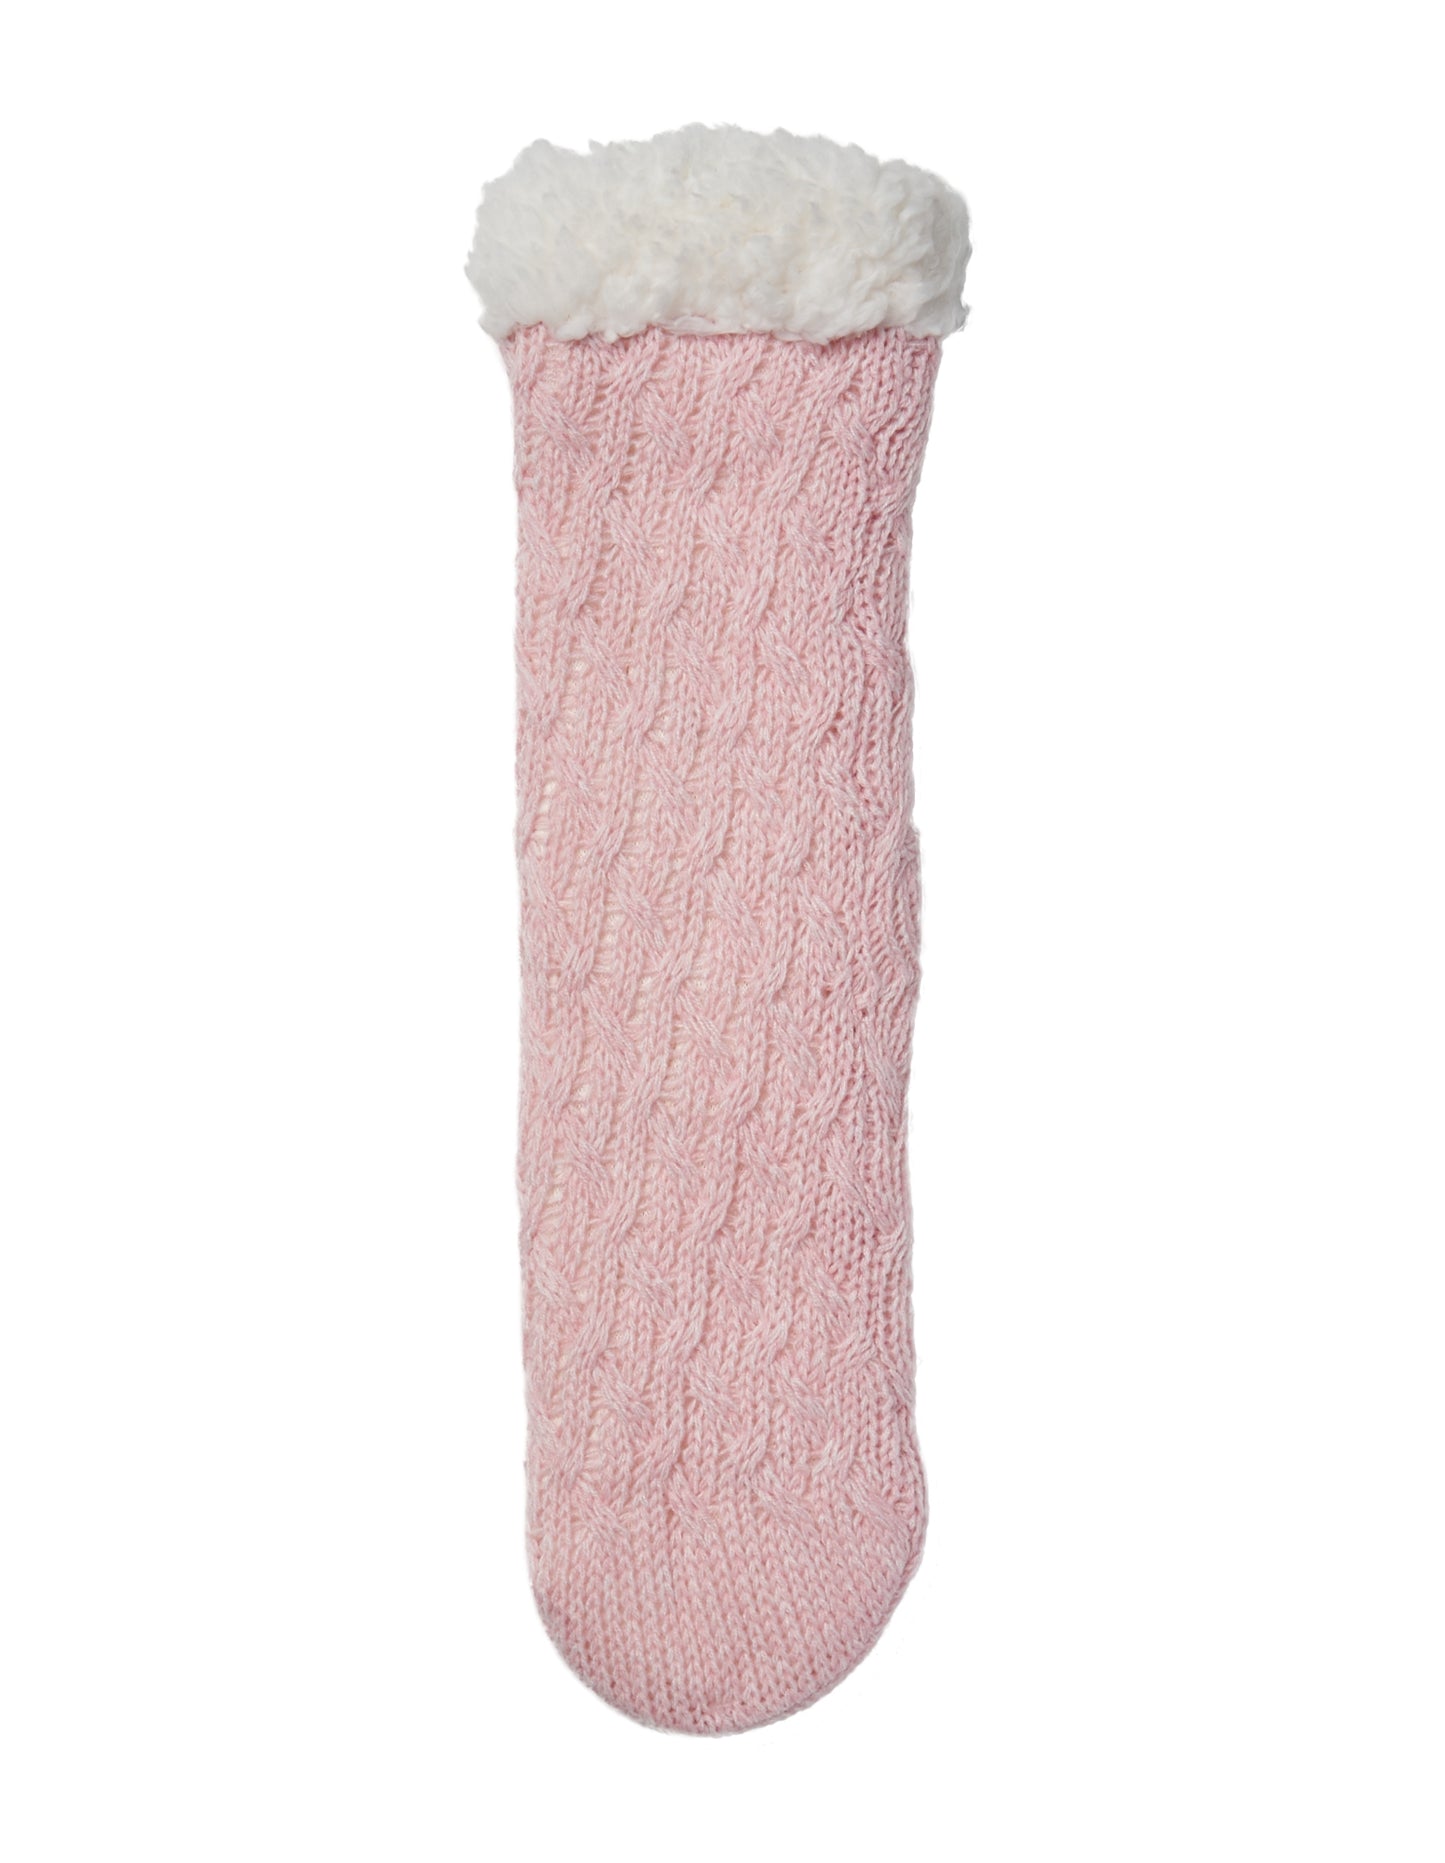 Length of Simon de Winter Women's Sherpa Lined Cable Home Socks in Soft Pink